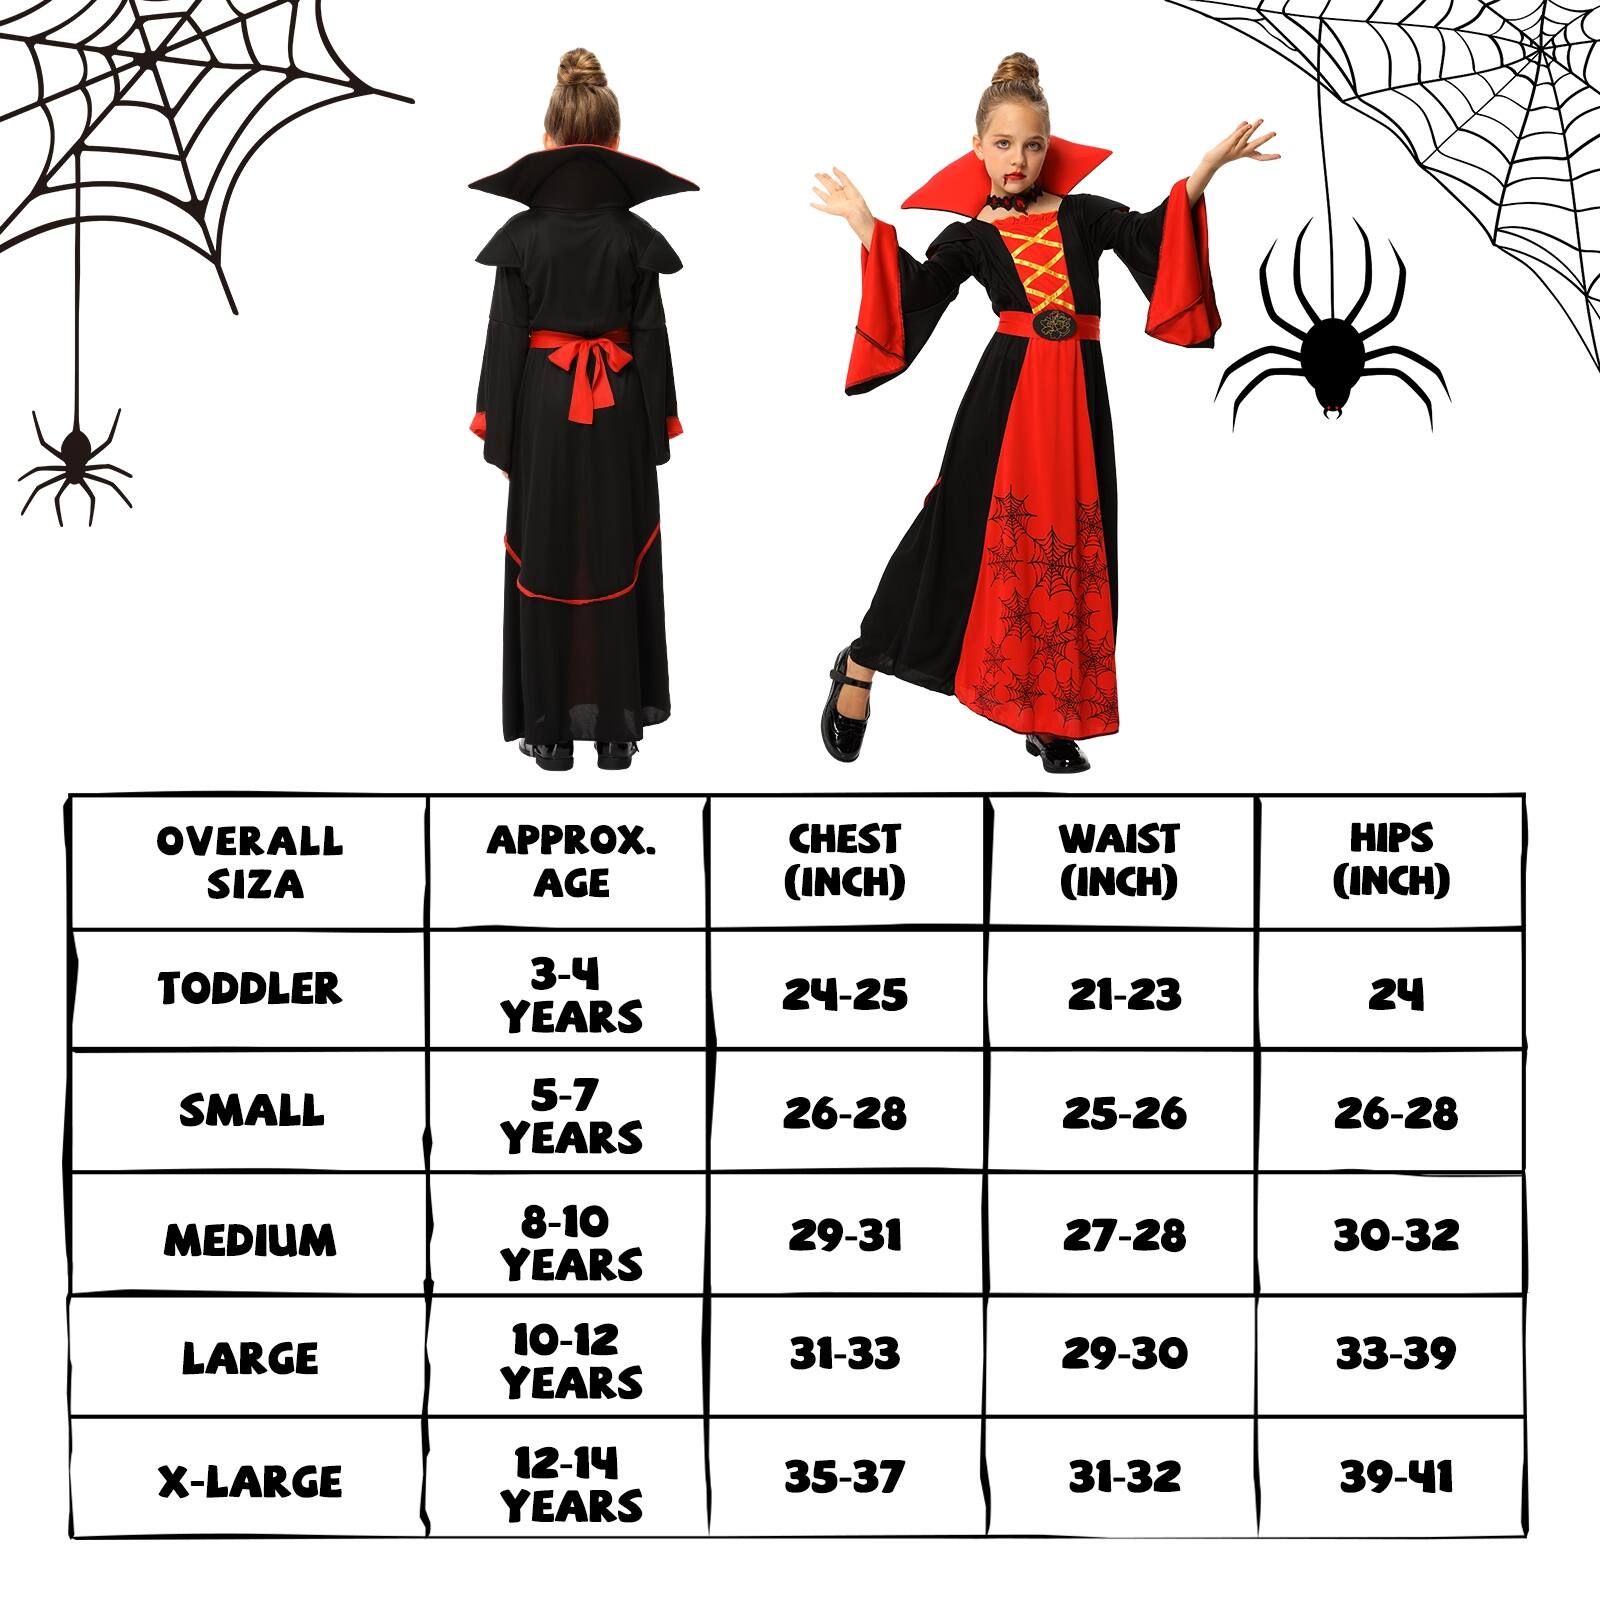 Royal Vampire Costume Halloween Dress Up Party Vampire-Themed Party ...